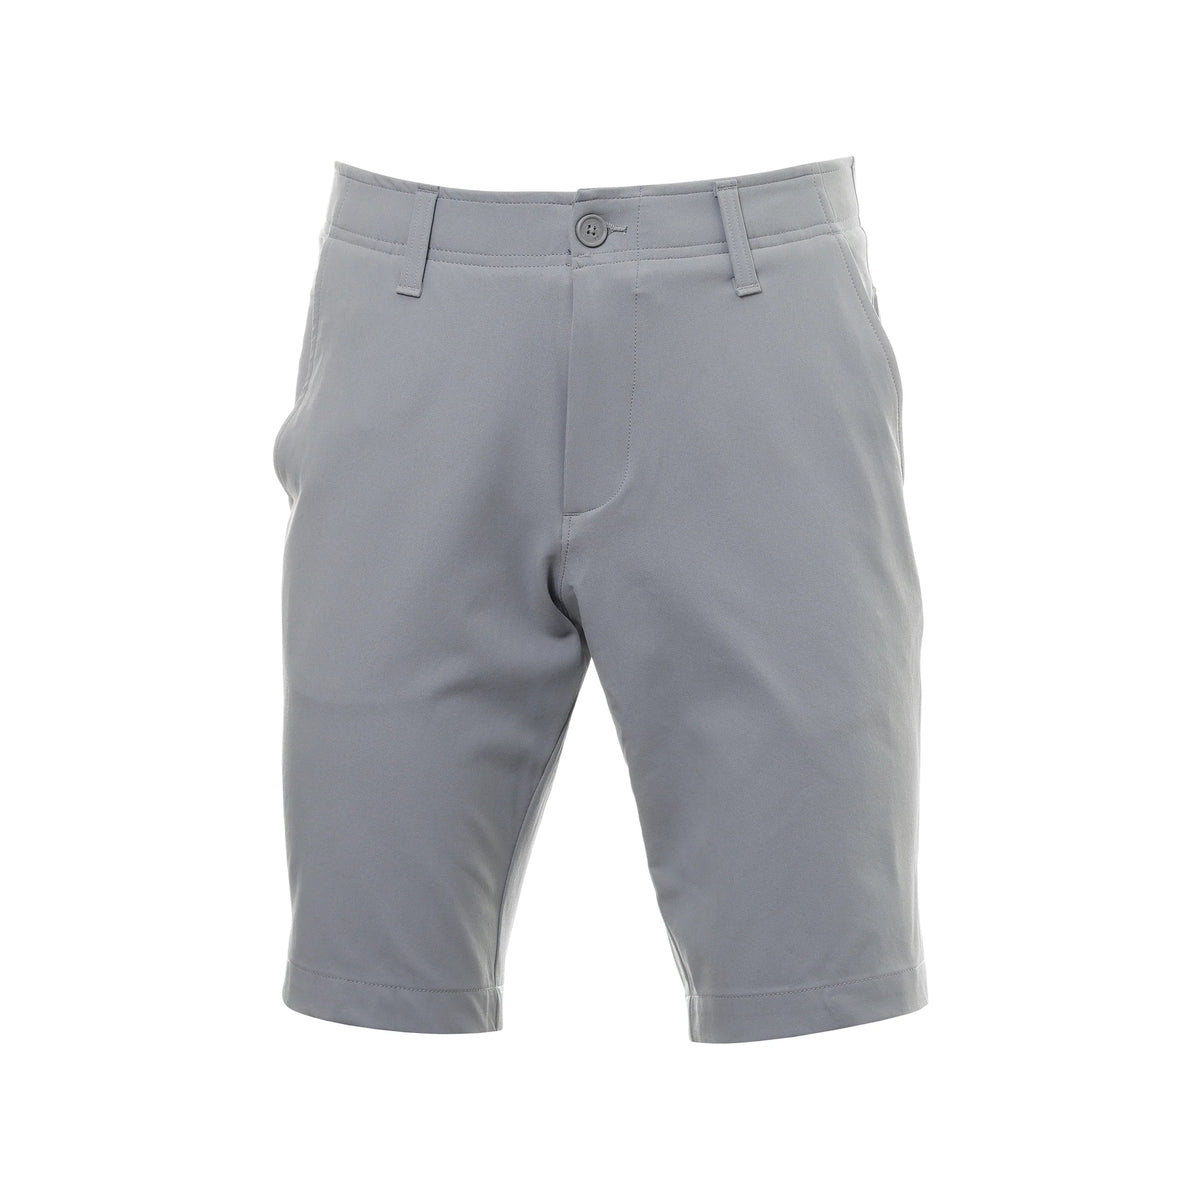 Under Armour Men's Drive Tapered Golf Shorts